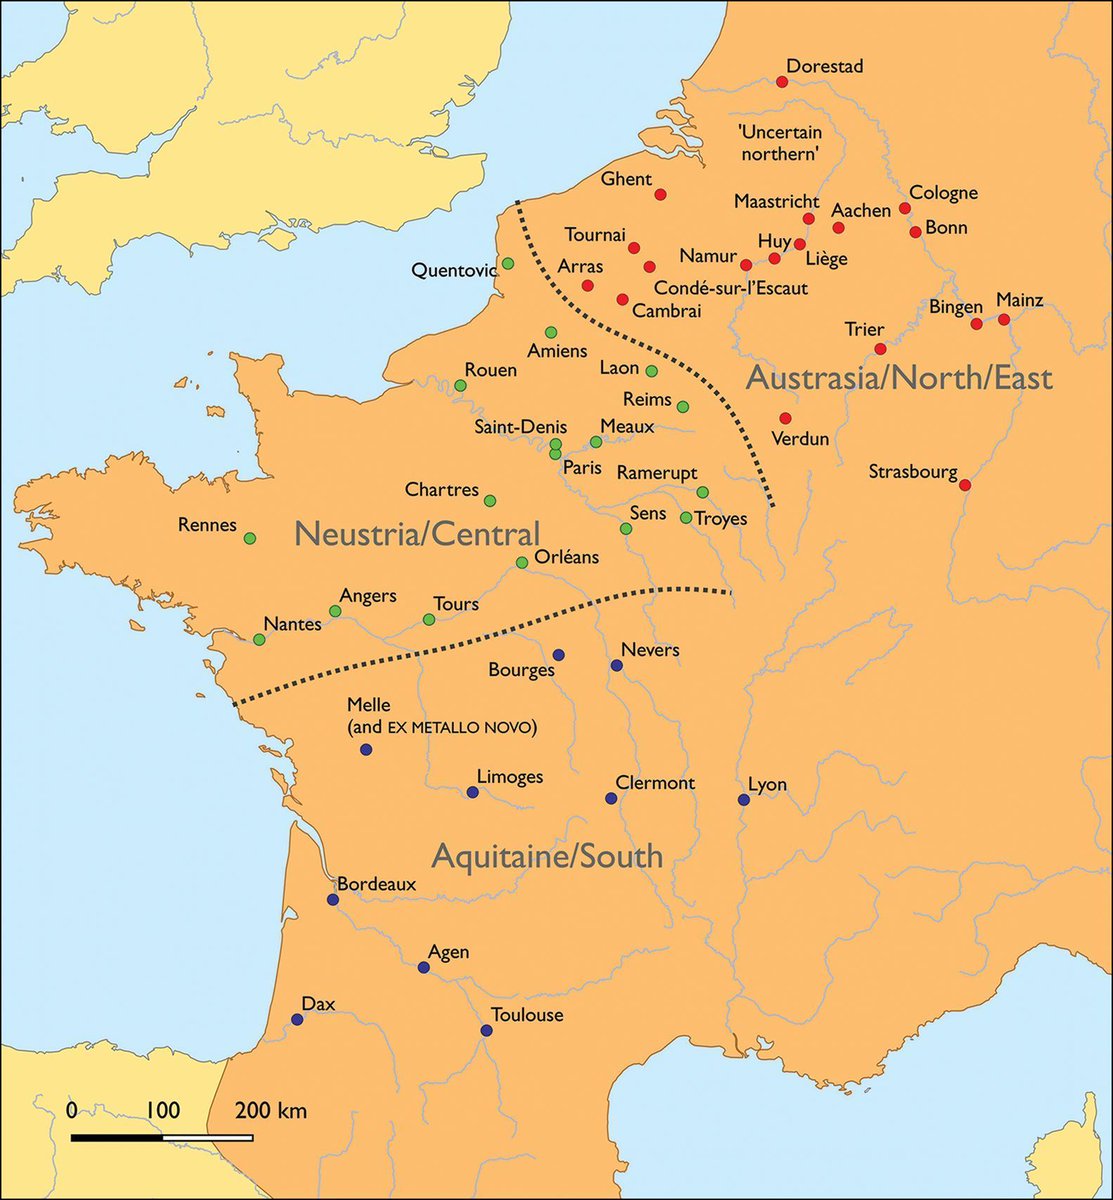 Map of silver coin mints in the Frankish Kingdoms #MedievalMonday Analysis of coins across western Europe suggests the majority were made of silver sourced from the Carolingian Empire, highlighting Charlemagne's international influence. 🆓 buff.ly/3PEgqOf